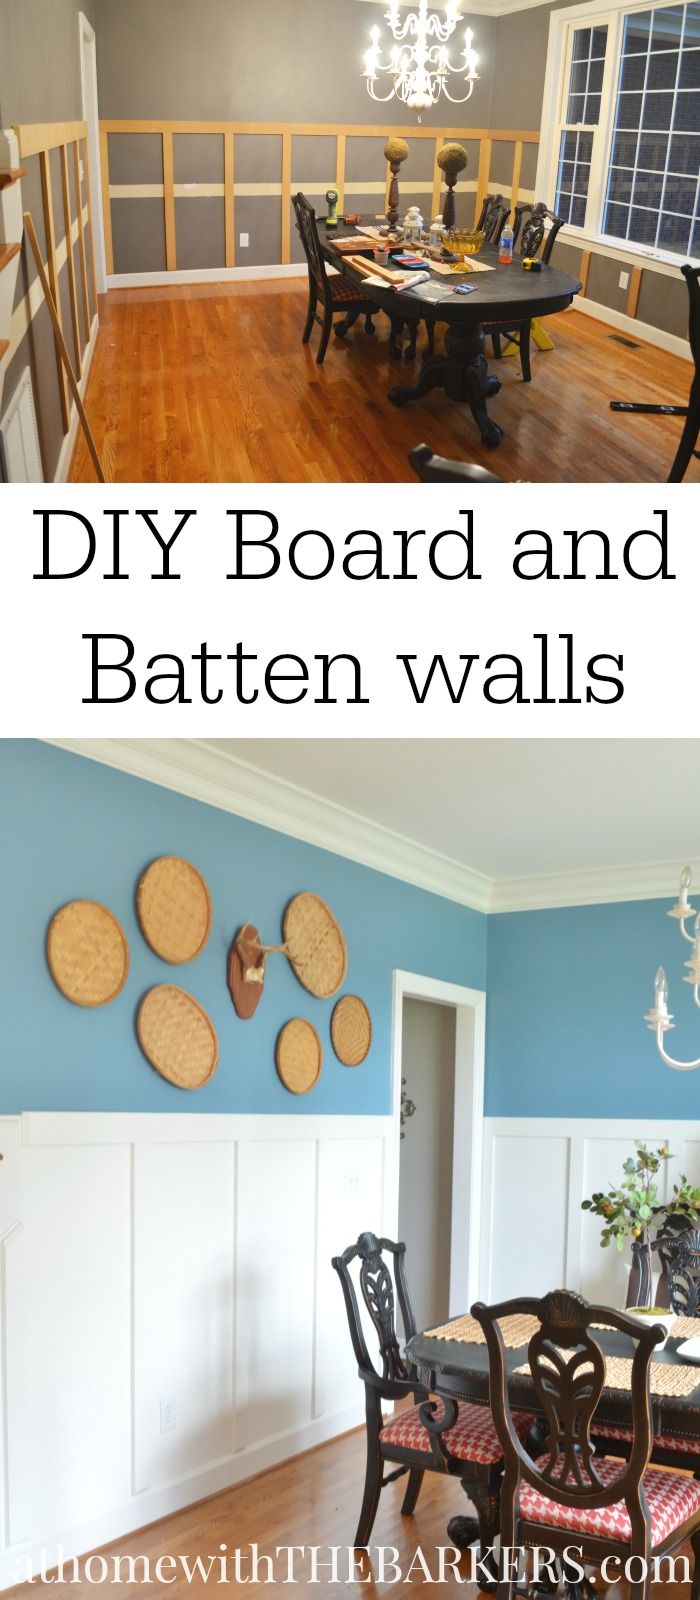 Room makeover with DIY Board and Batten wall Treatment